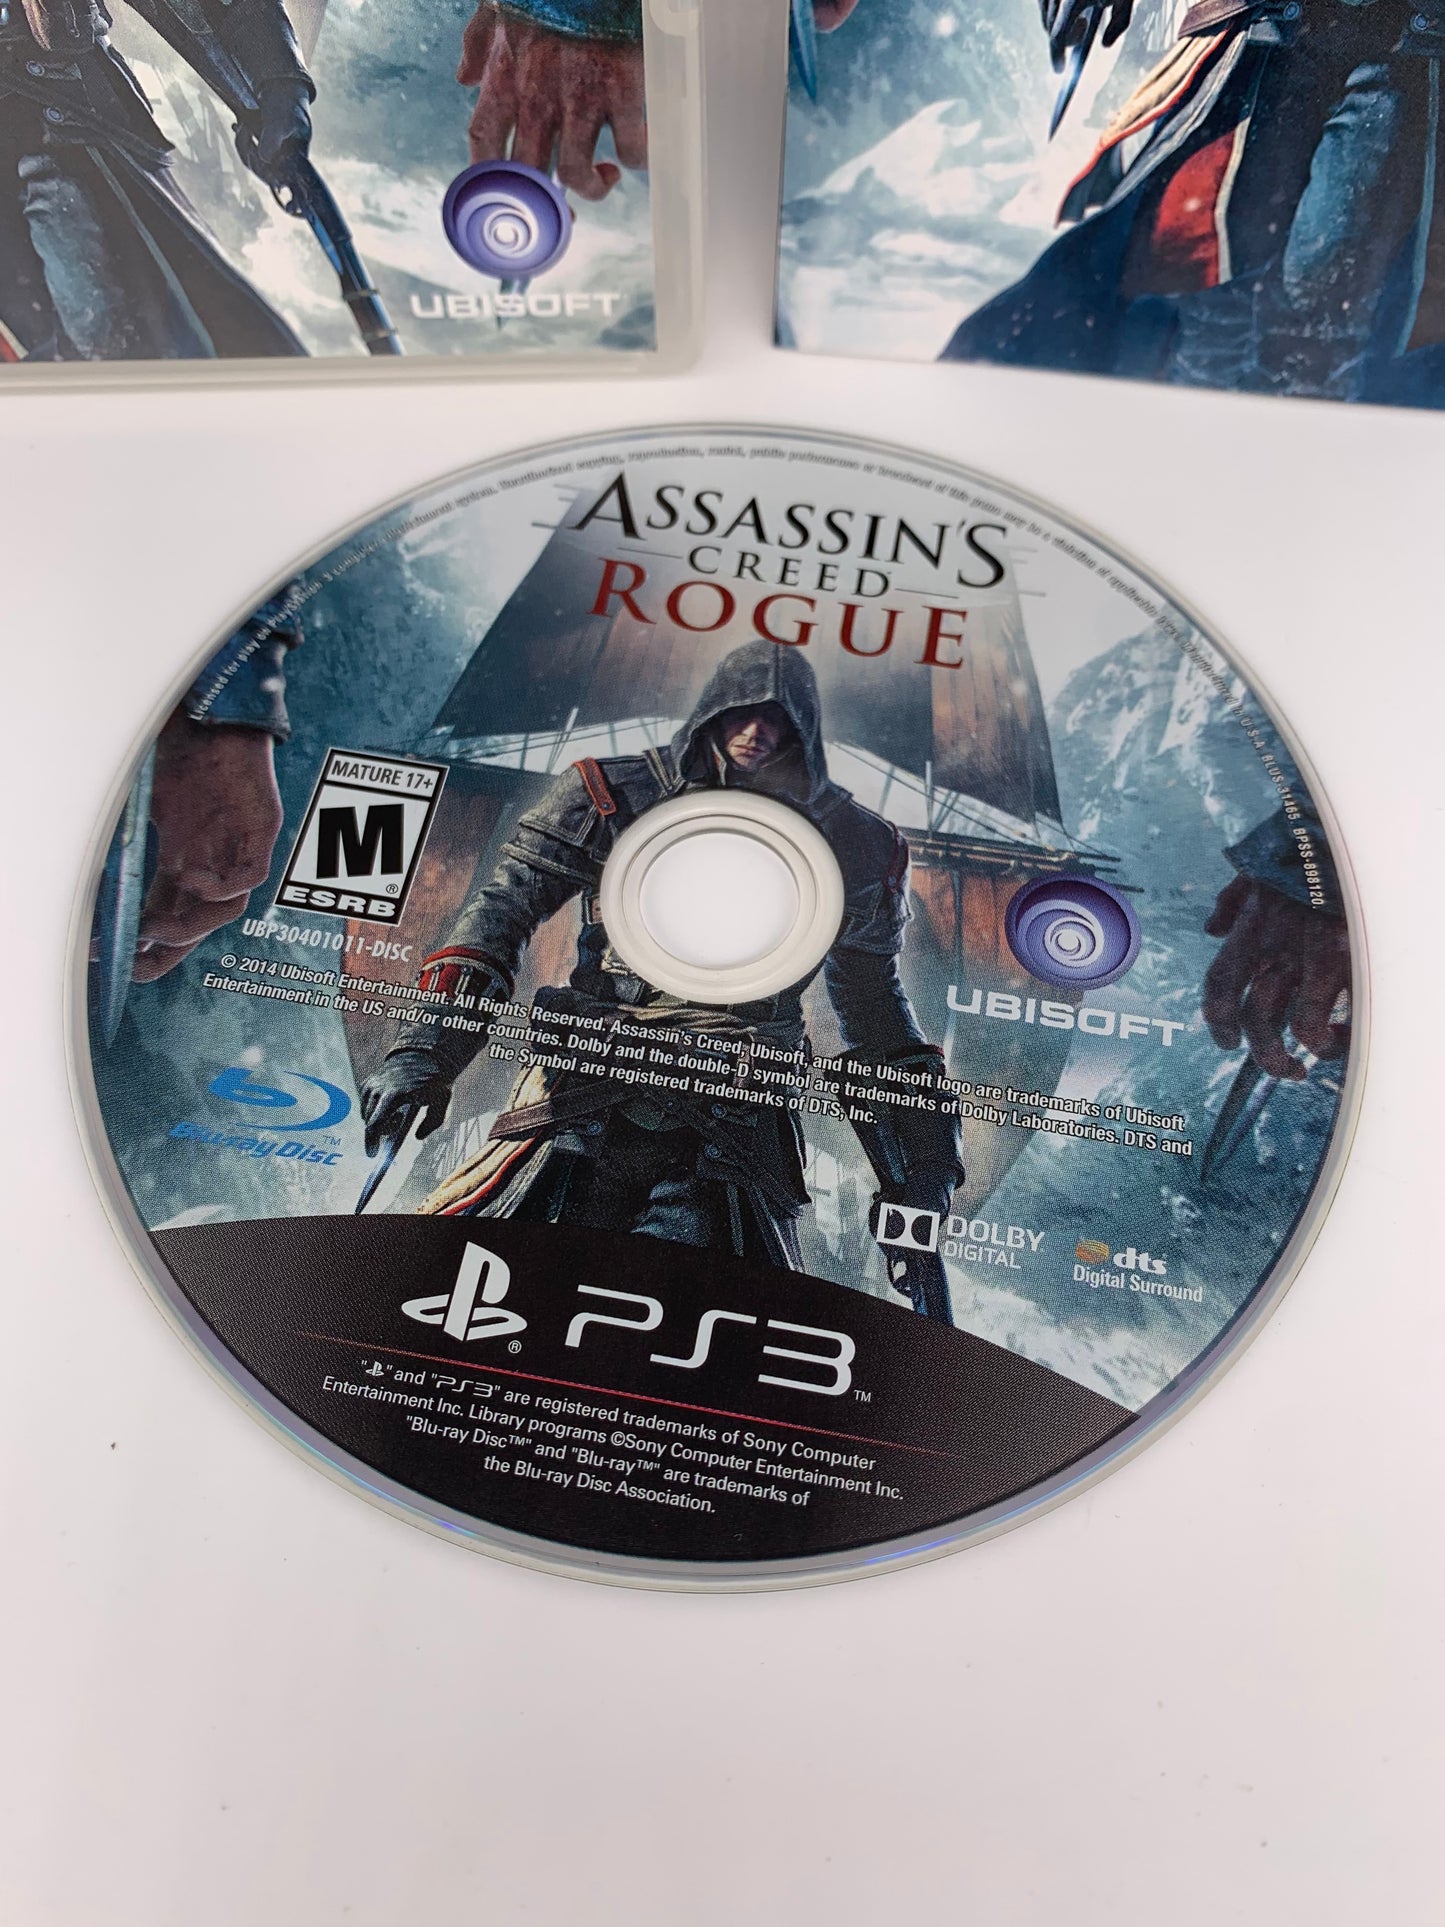 SONY PLAYSTATiON 3 [PS3] | ASSASSiNS CREED ROGUE | LiMiTED EDiTiON